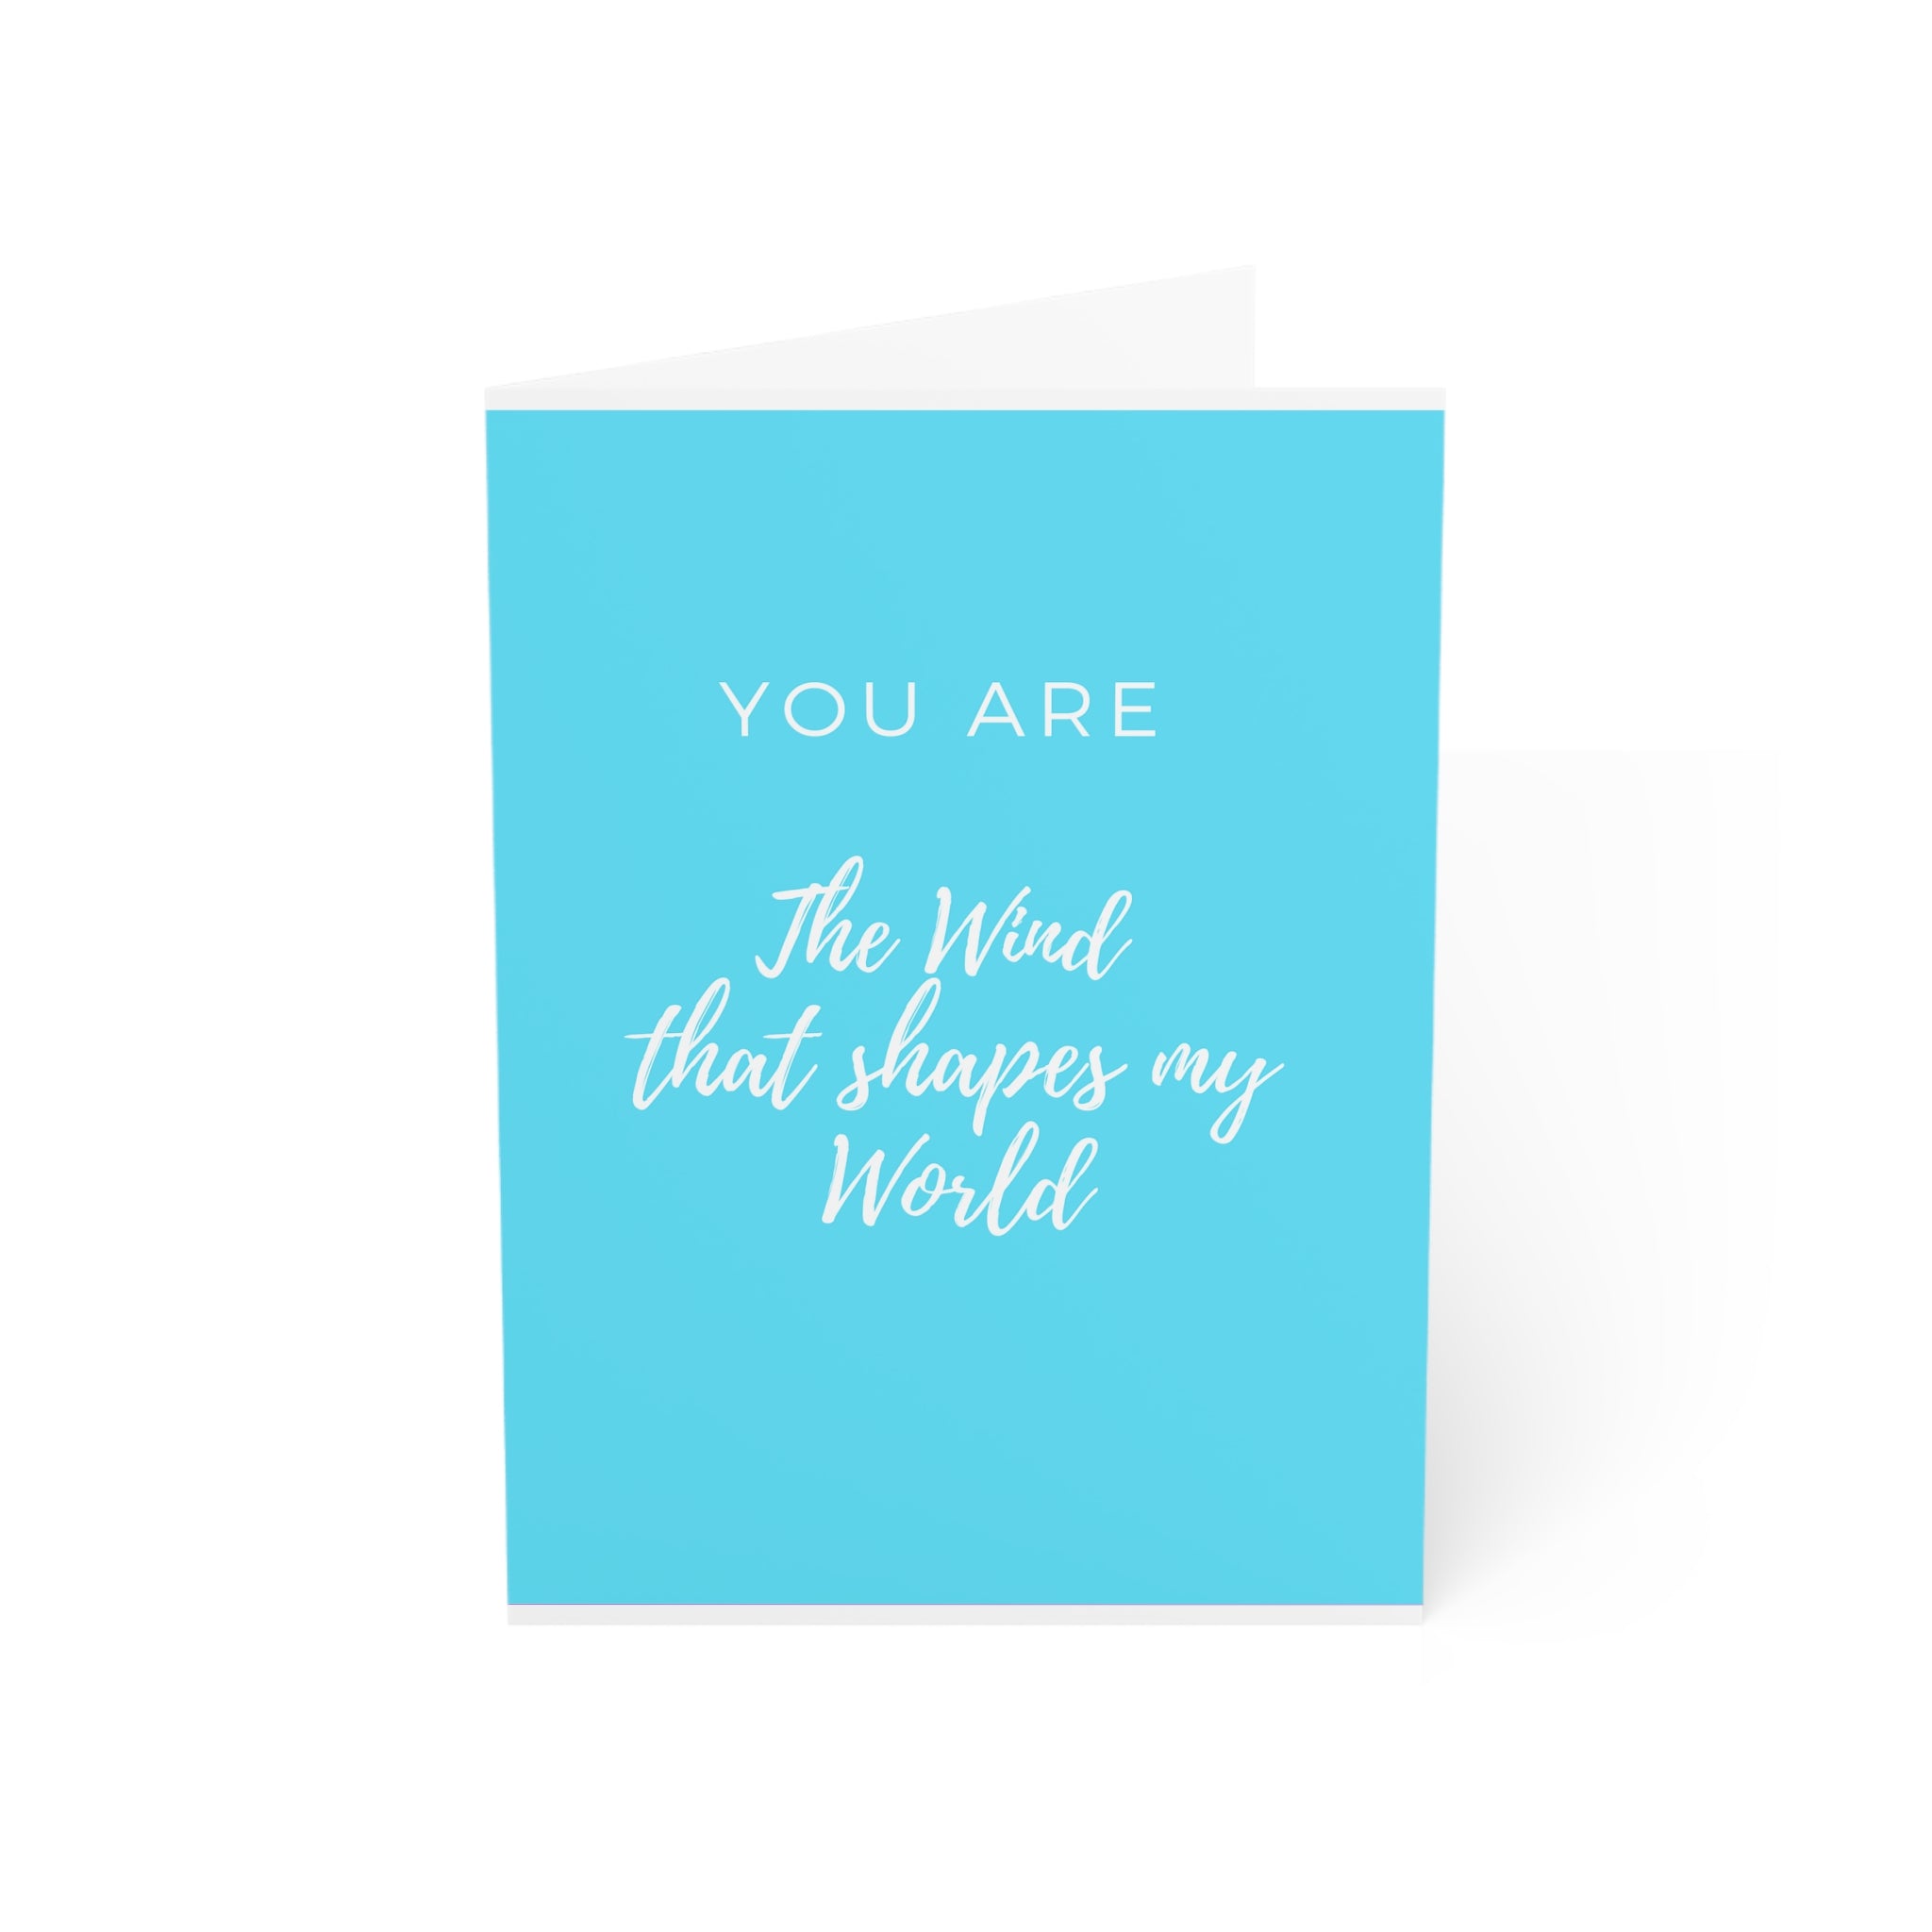 Greeting Cards (Light Blue Cover)  You are the wind that shapes my world